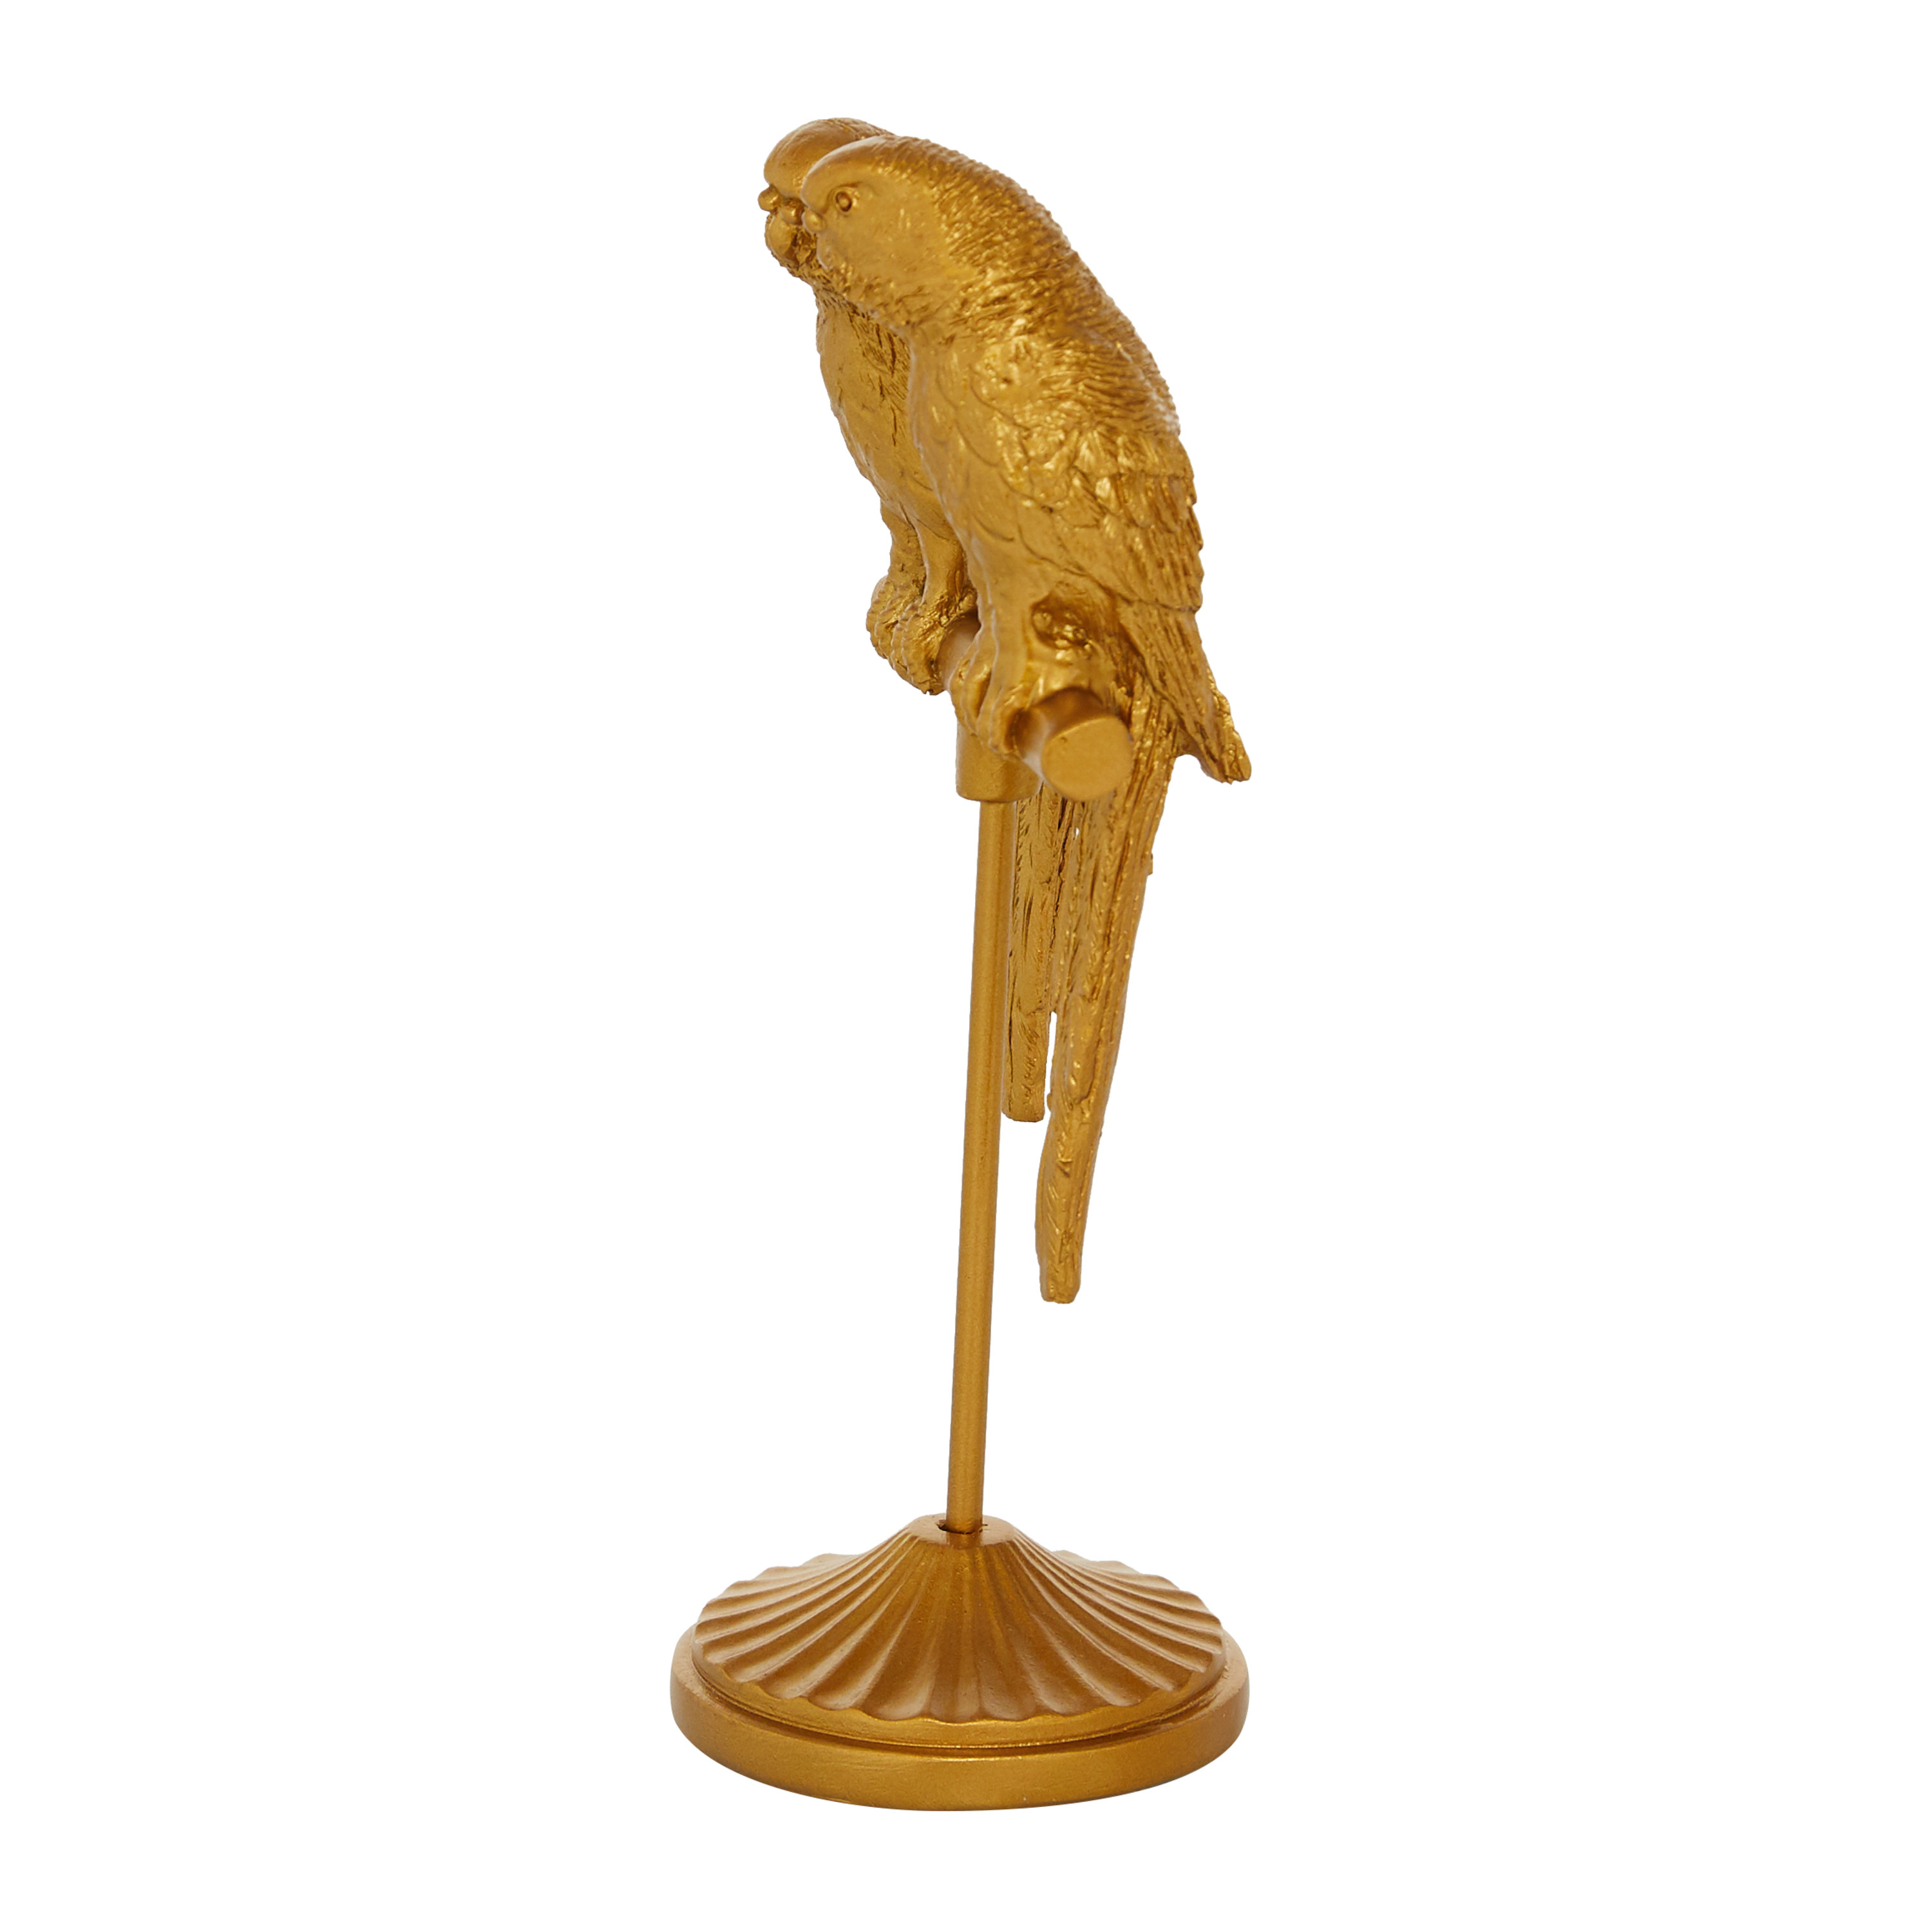 3" x 9" Gold Polystone Parrot Sculpture, by DecMode